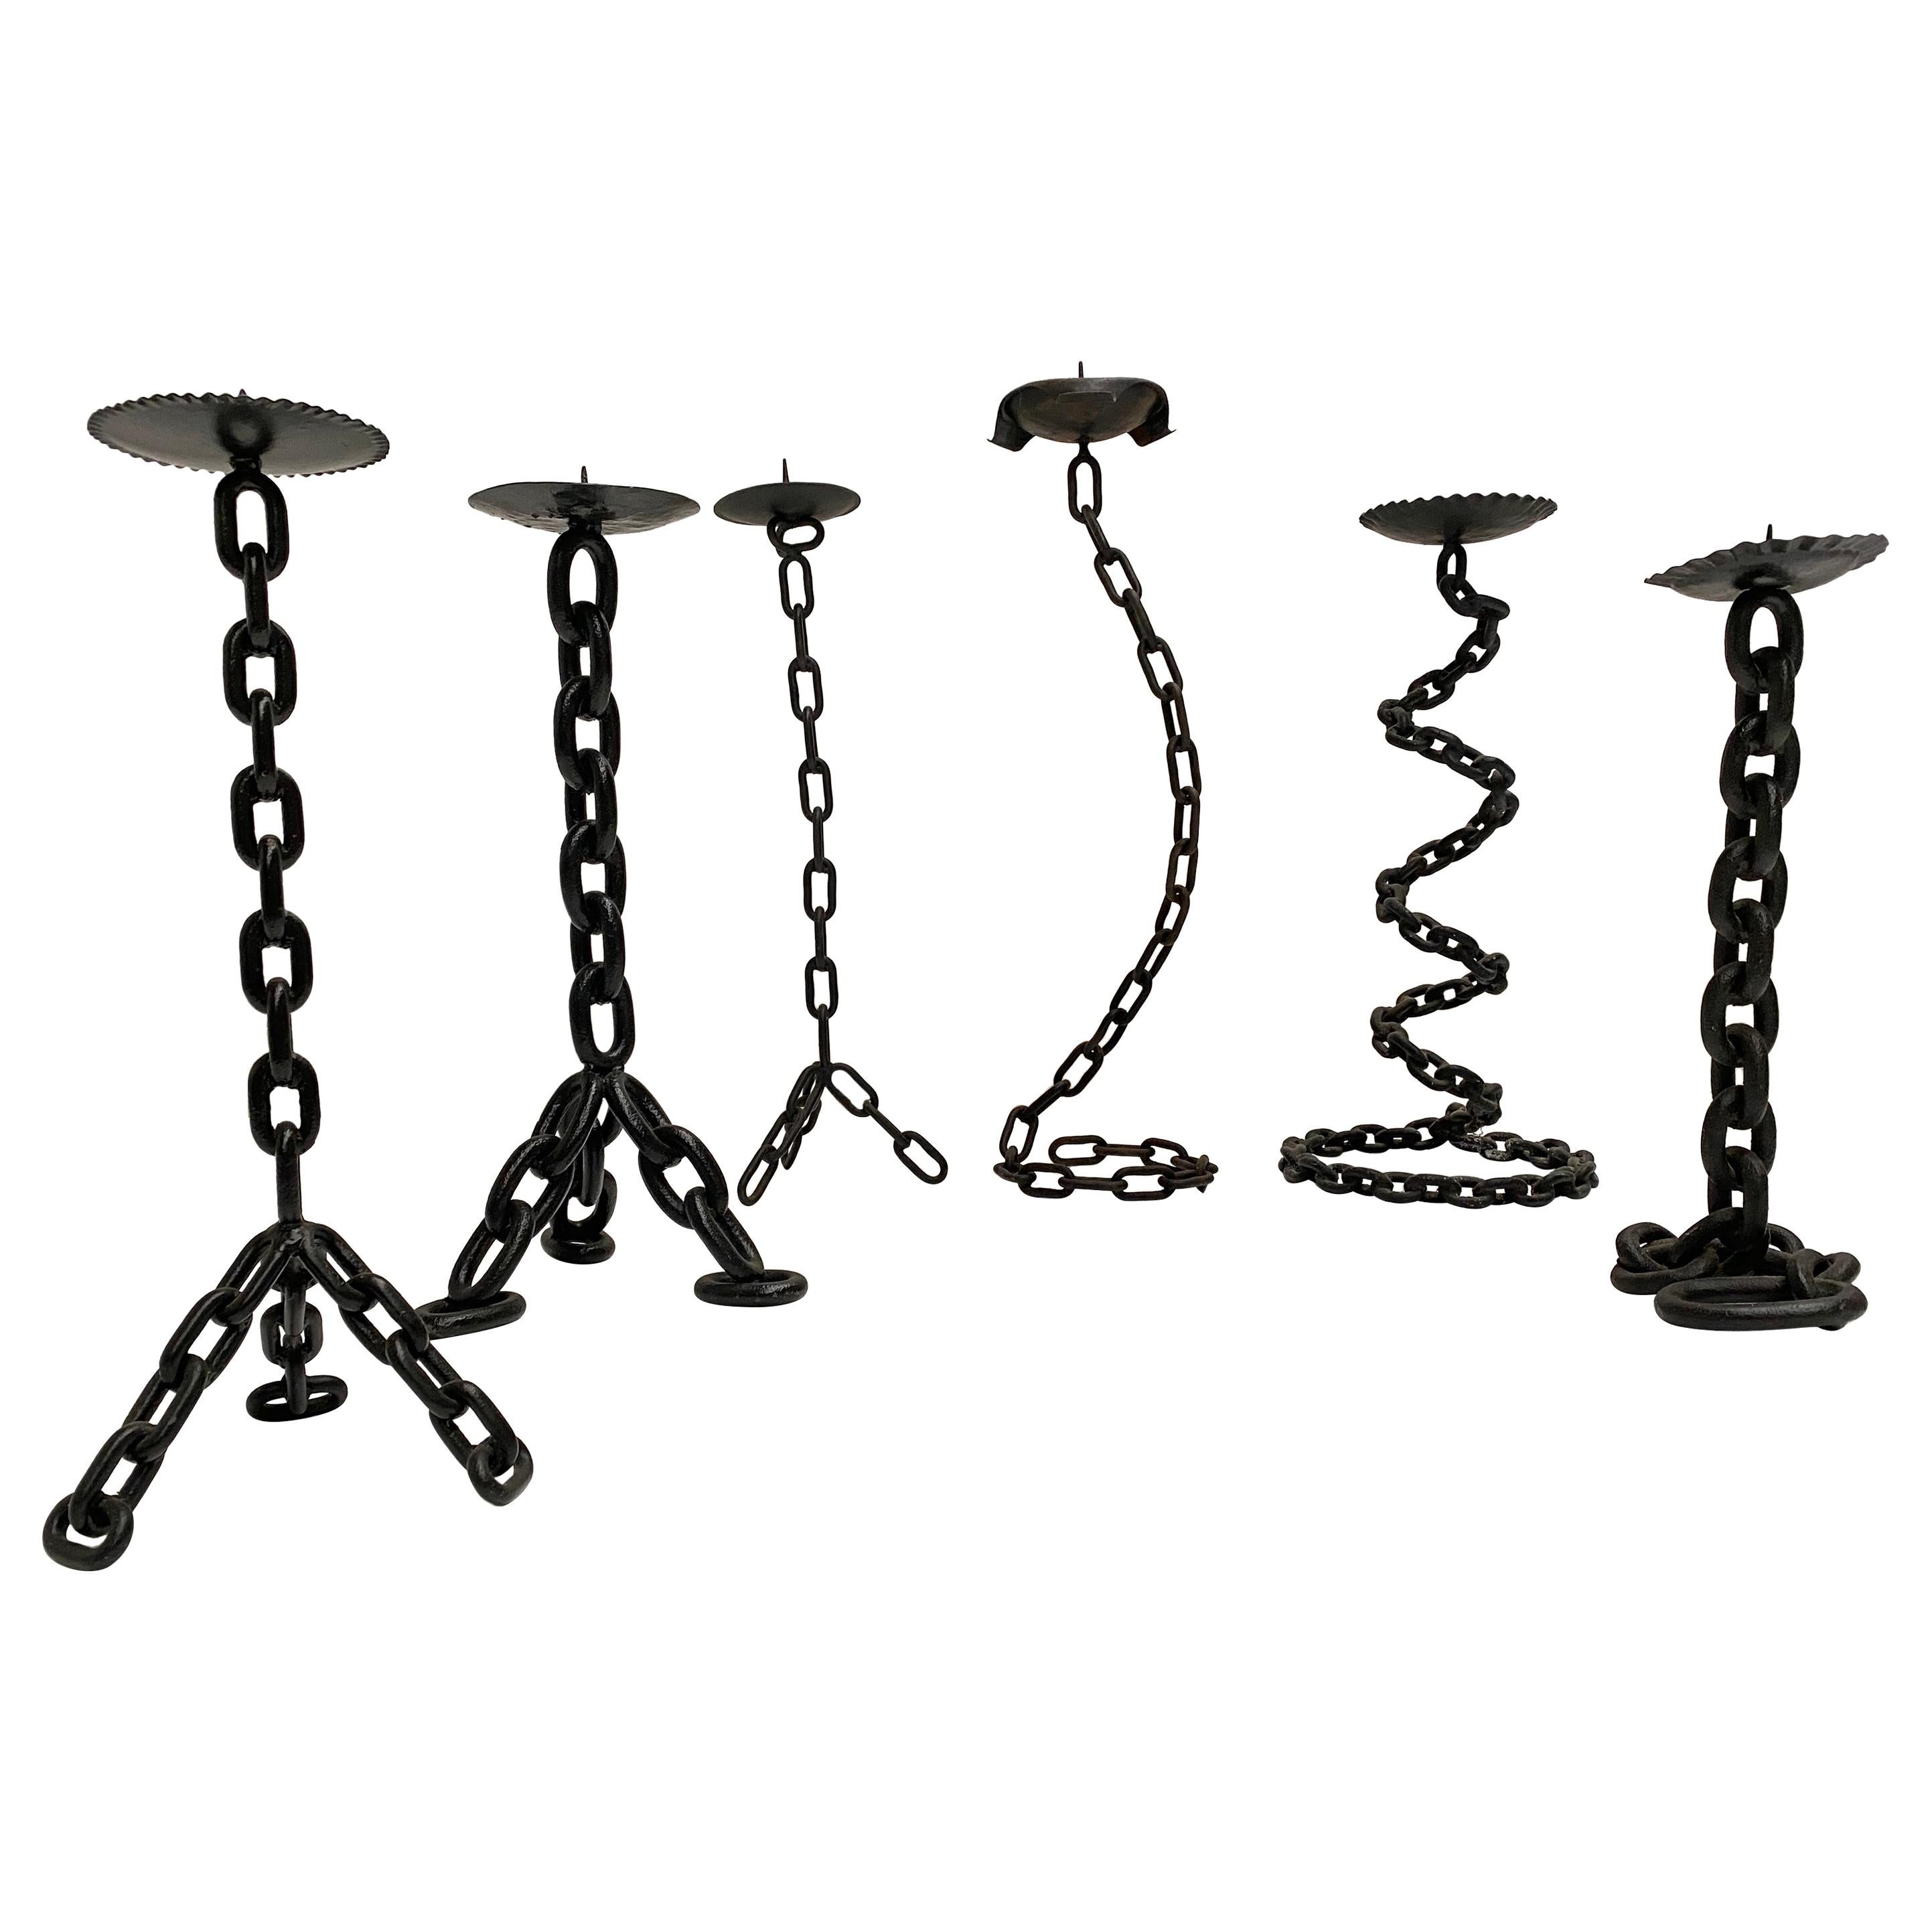 Brutalist Collection of Welded Iron Chain Candeholders 1970s, The Netherlands